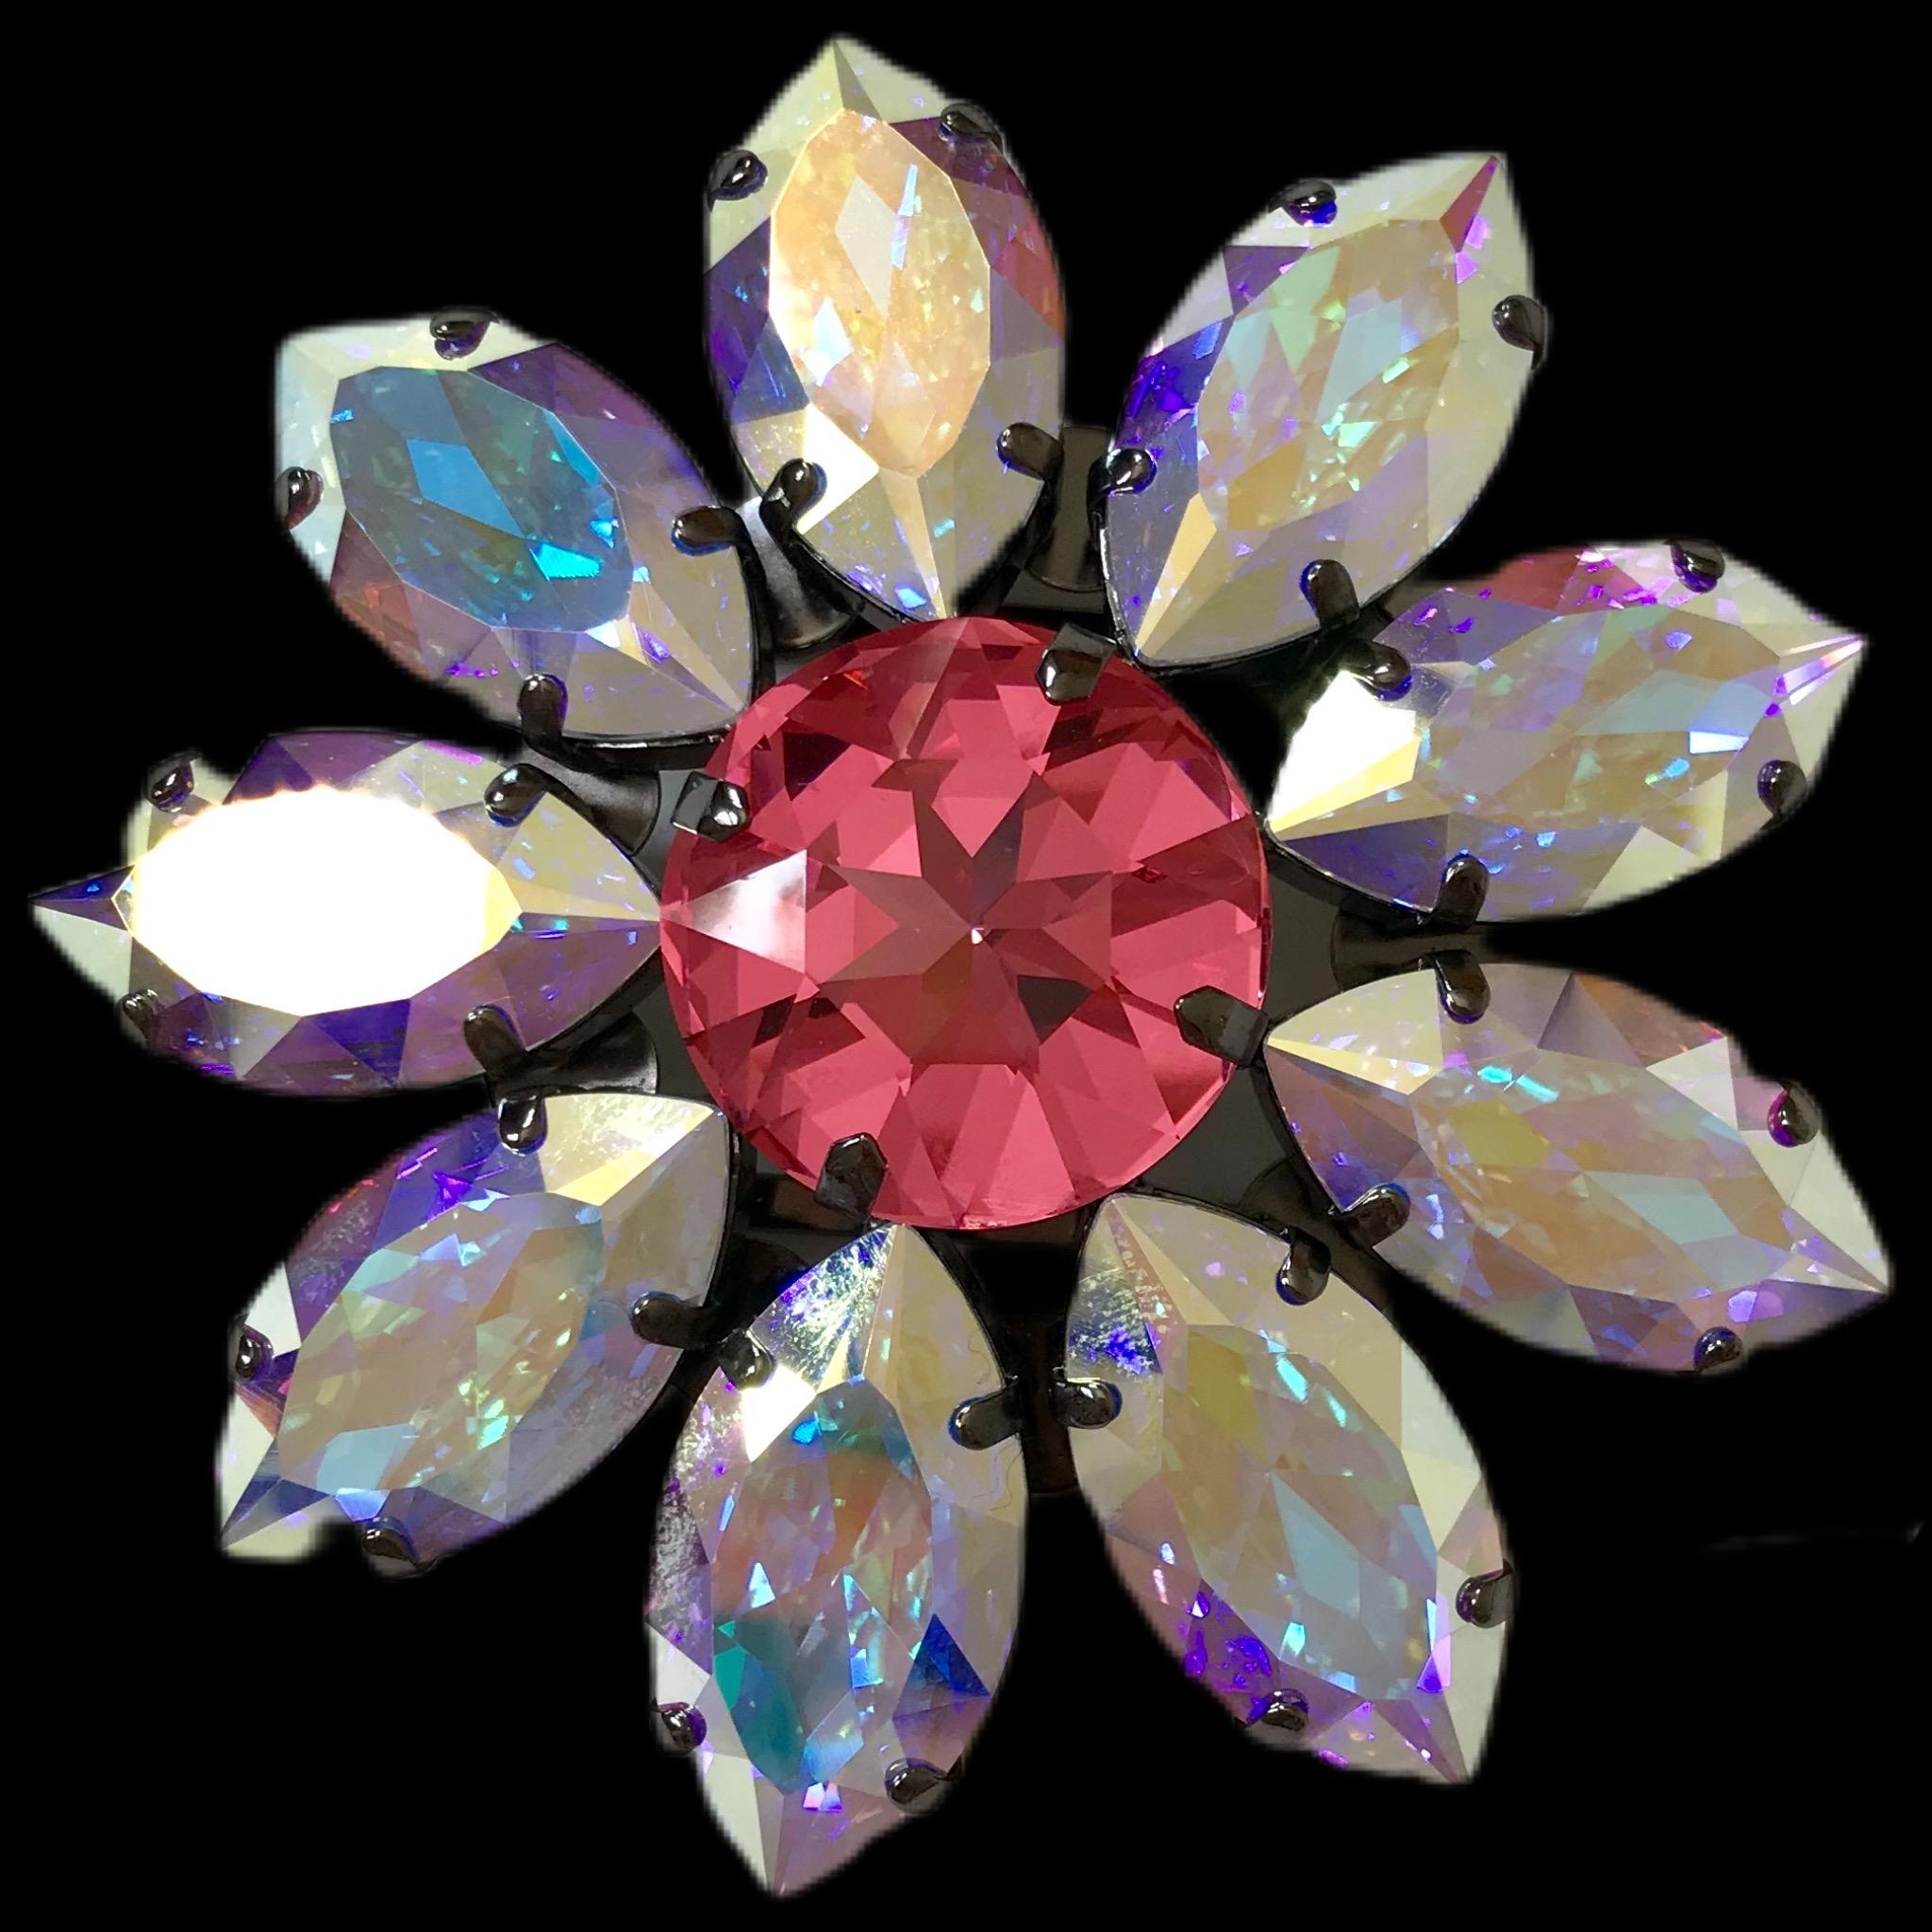 The Pelush pink and opal Swarowsky crystal flower brooch is a one of a kind exclusive piece. Made for Pelush by Florentine artisans in Italy, this striking statement jewelry can be utilized in many different ways. The modern daisy design features a